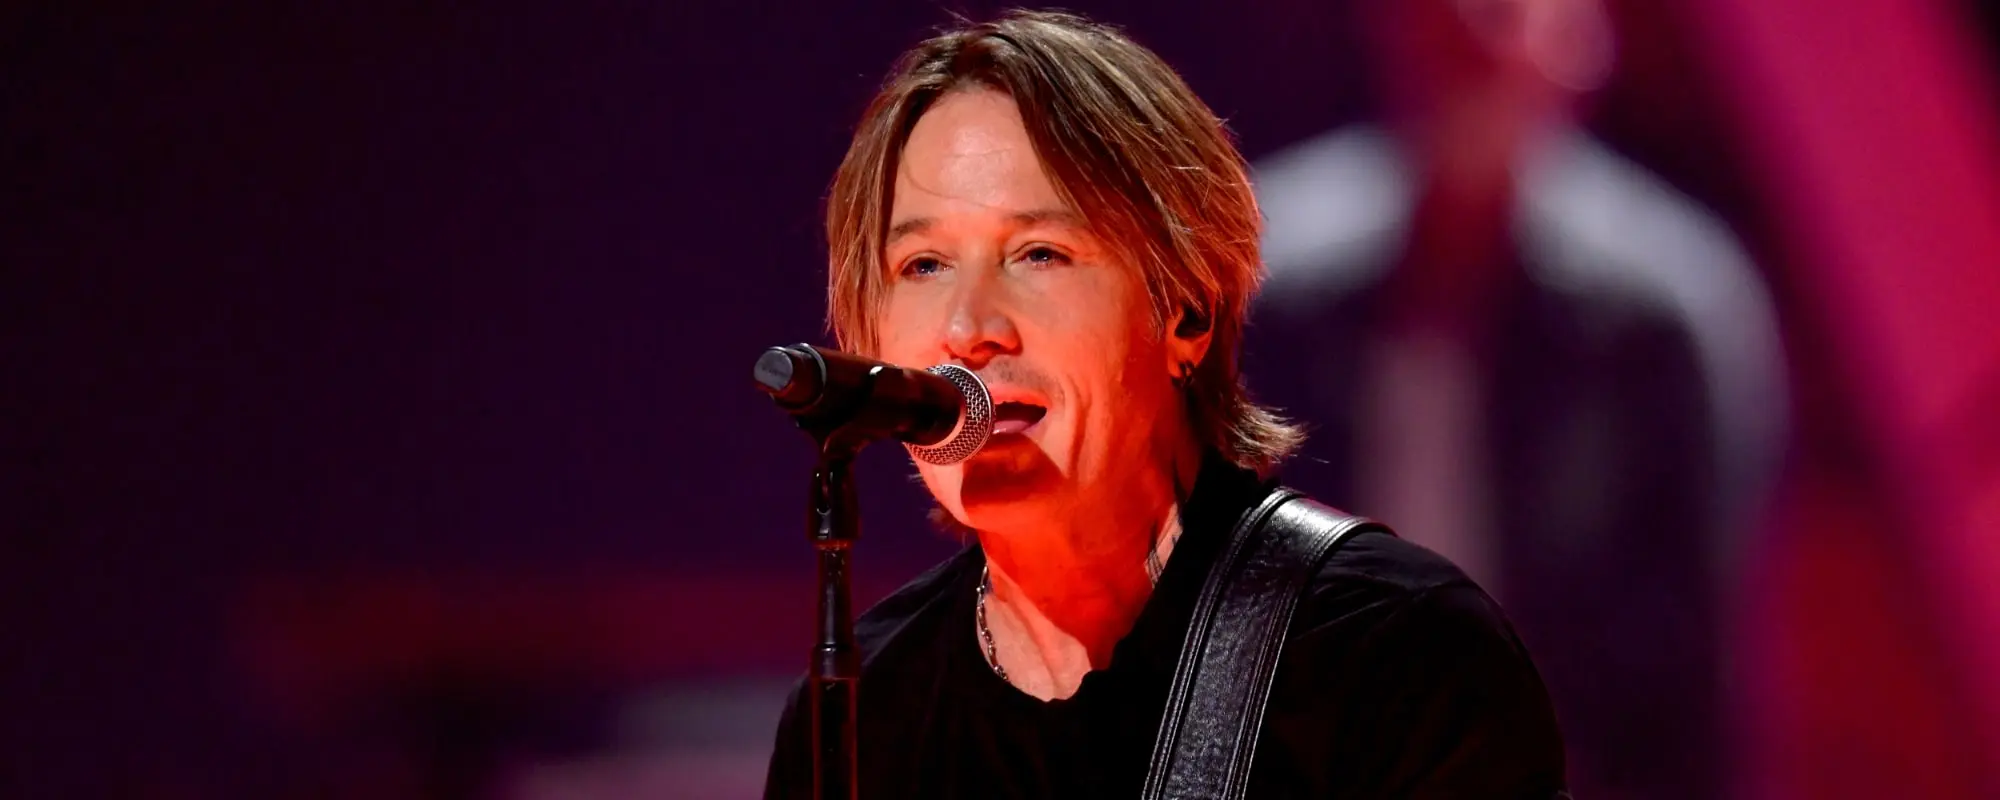 Keith Urban will release a duet with Lainey Wilson next week.